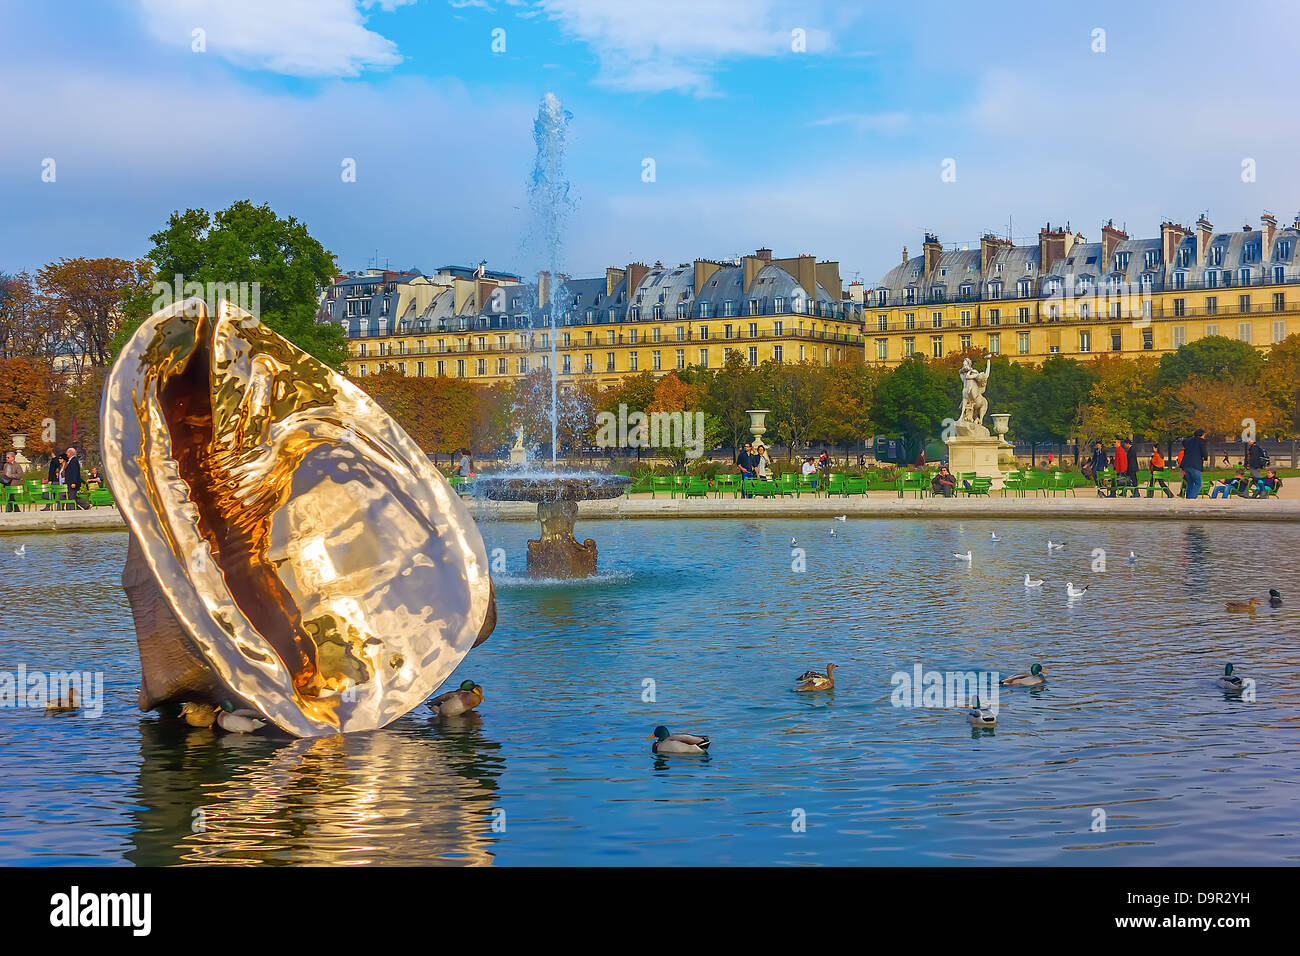 The Tuileries Garden of the Louvre Museum on October 23, 2012 in Paris. Stock Photo